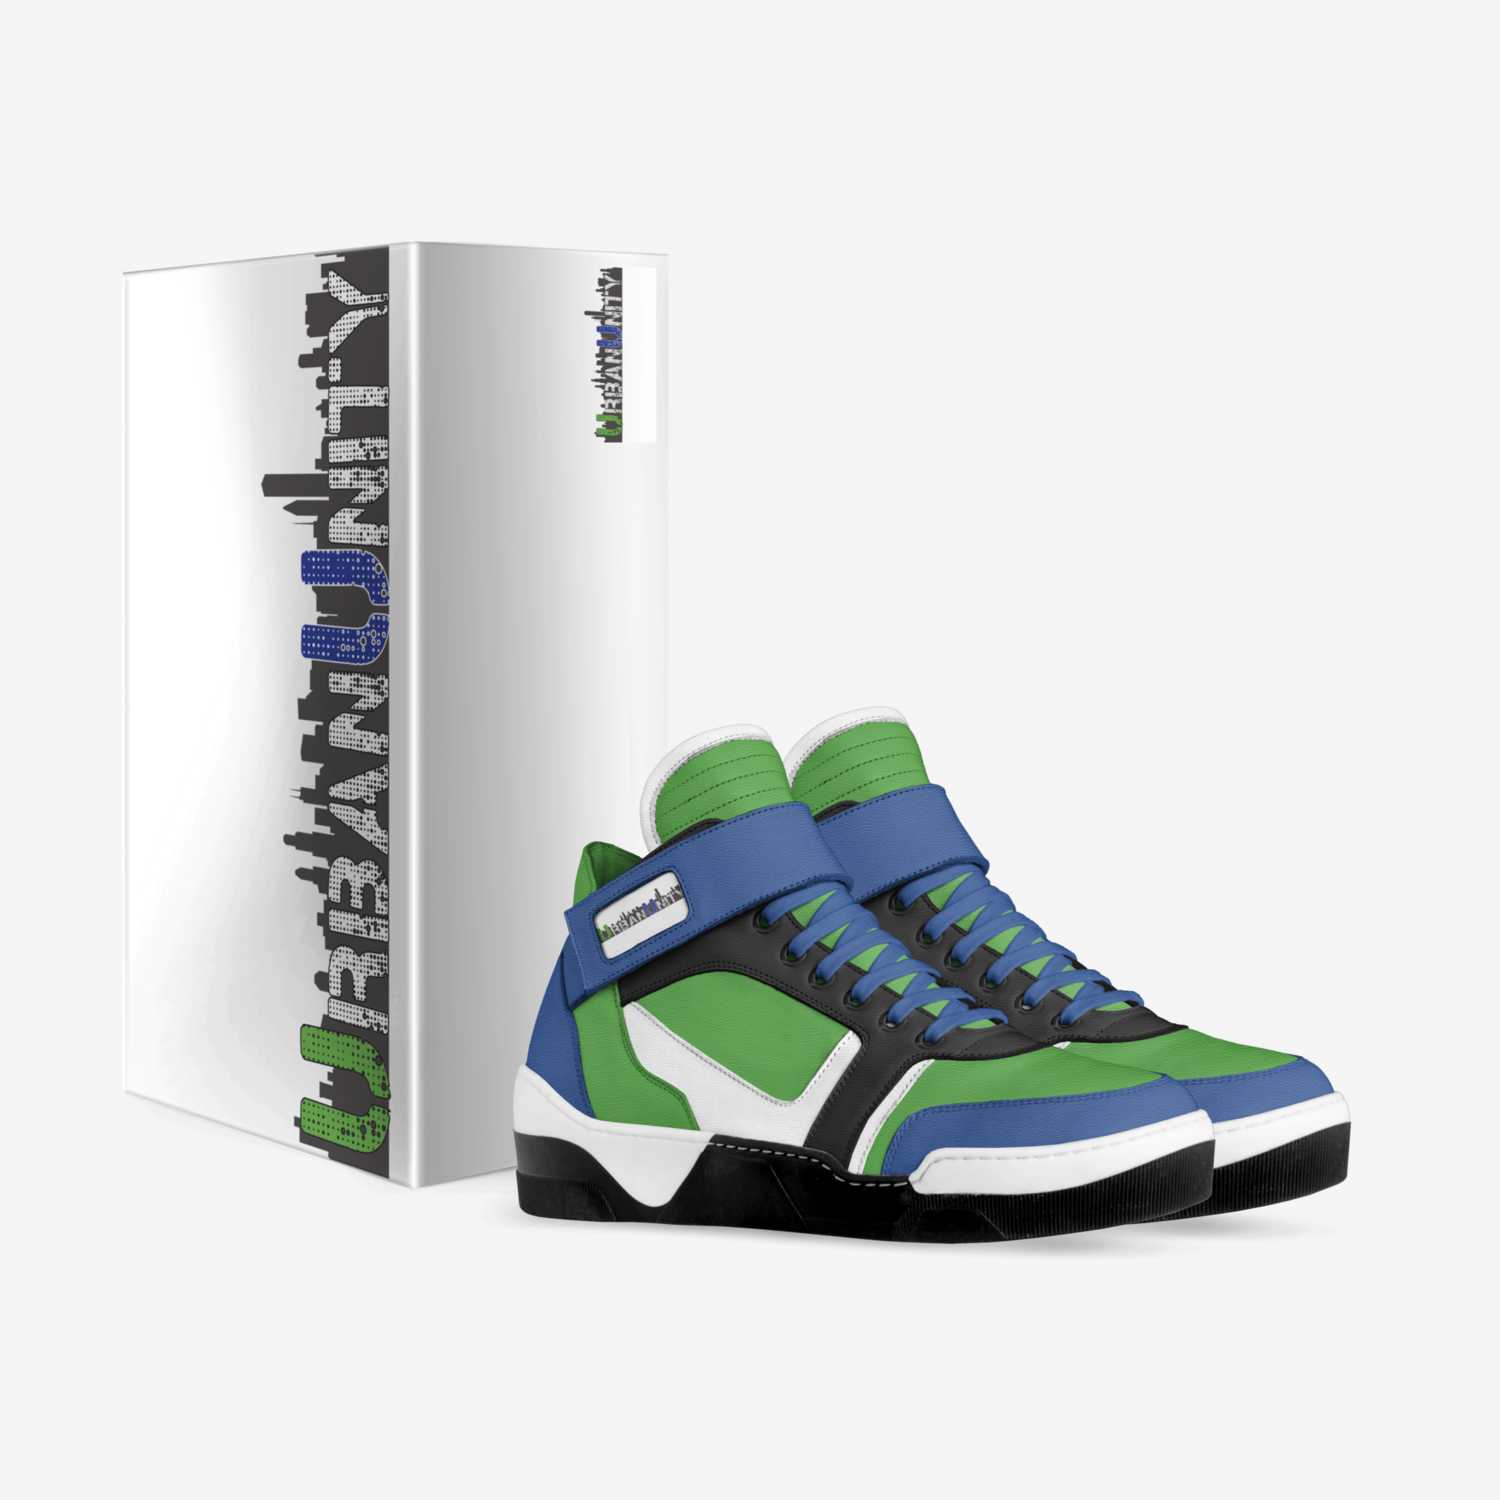 URBAN UNITY'S custom made in Italy shoes by Brittany Lanzano | Box view